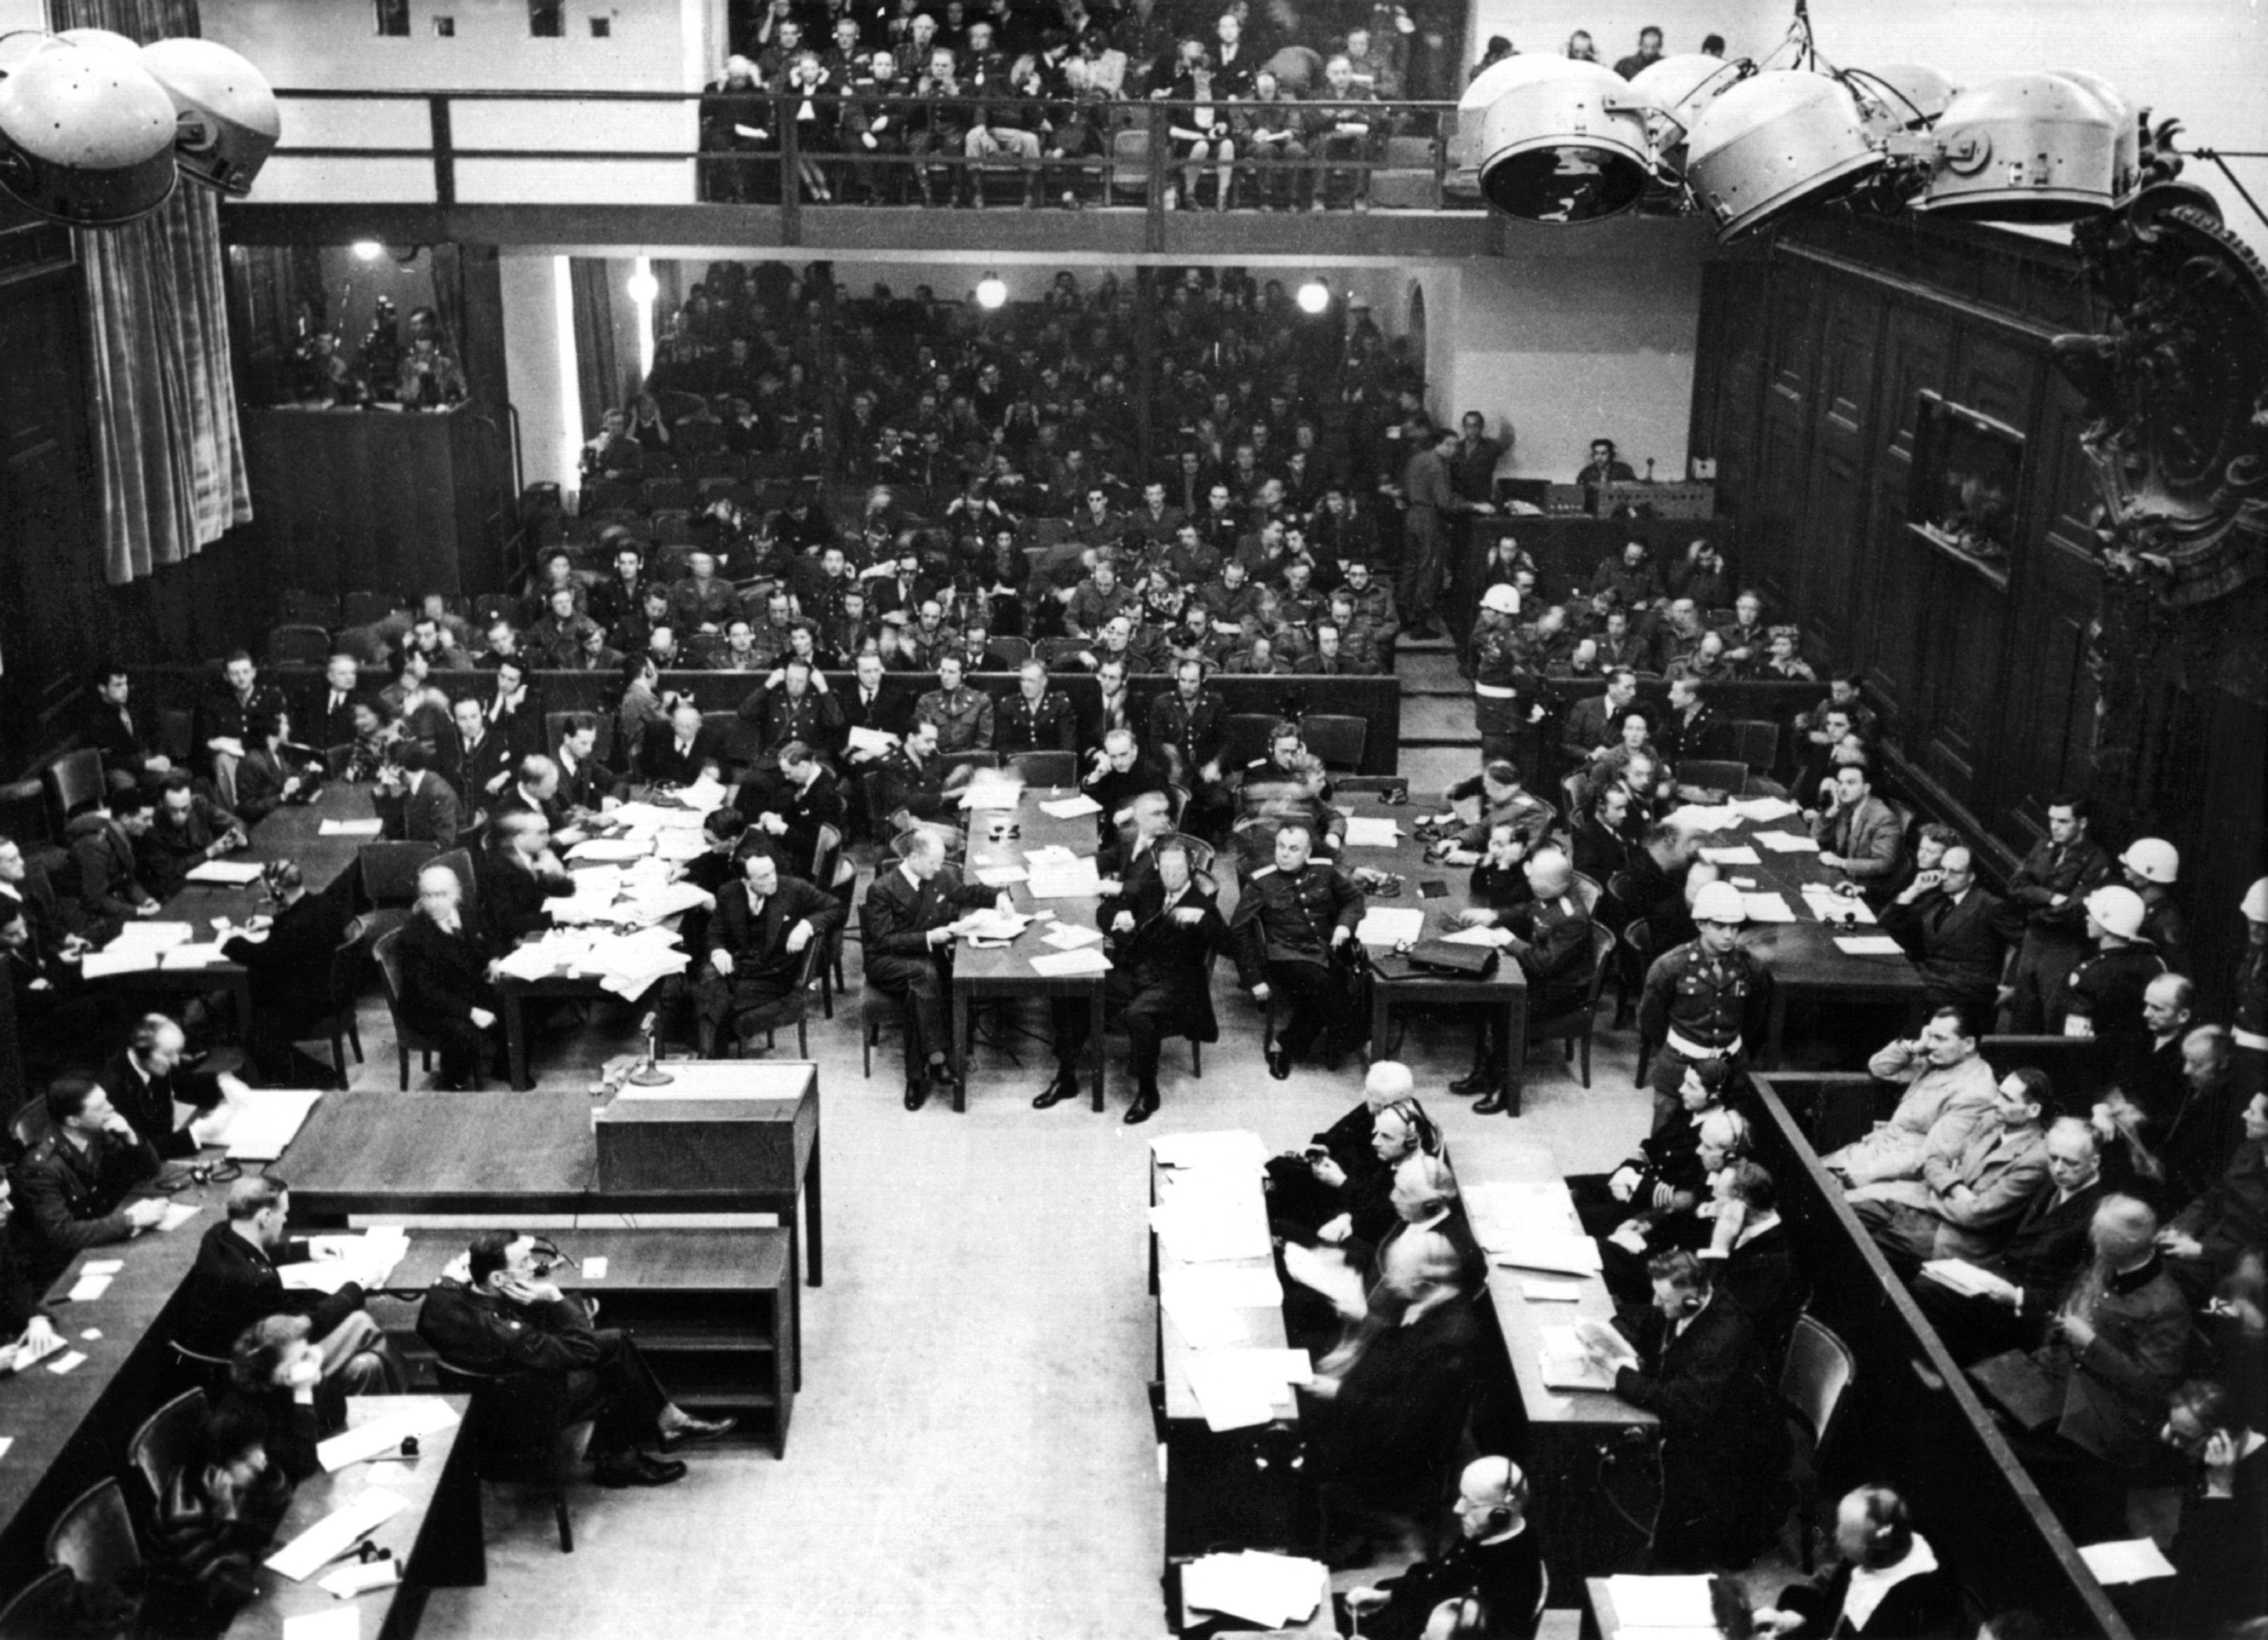 (dpa files) – A view over the courtroom at the opening of the Nuremberg Trials, in the palace of justice in Nuremberg, Germany, 20 November 1945. On the right hand side sit the defendants, in front of them their defense lawyers, in the background the stat